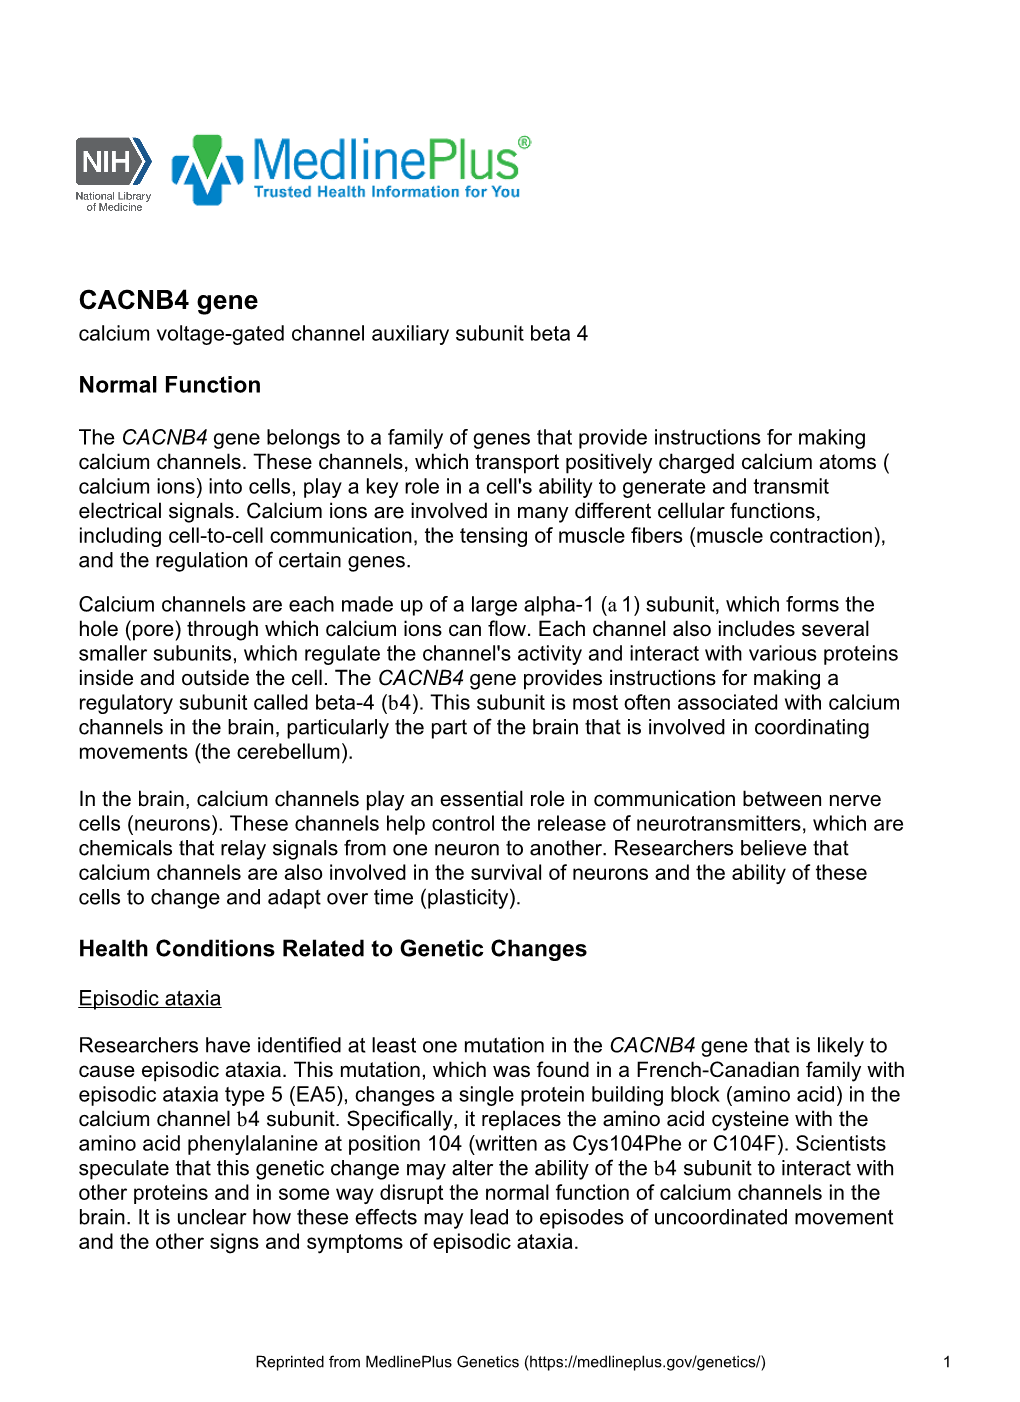 CACNB4 Gene Calcium Voltage-Gated Channel Auxiliary Subunit Beta 4